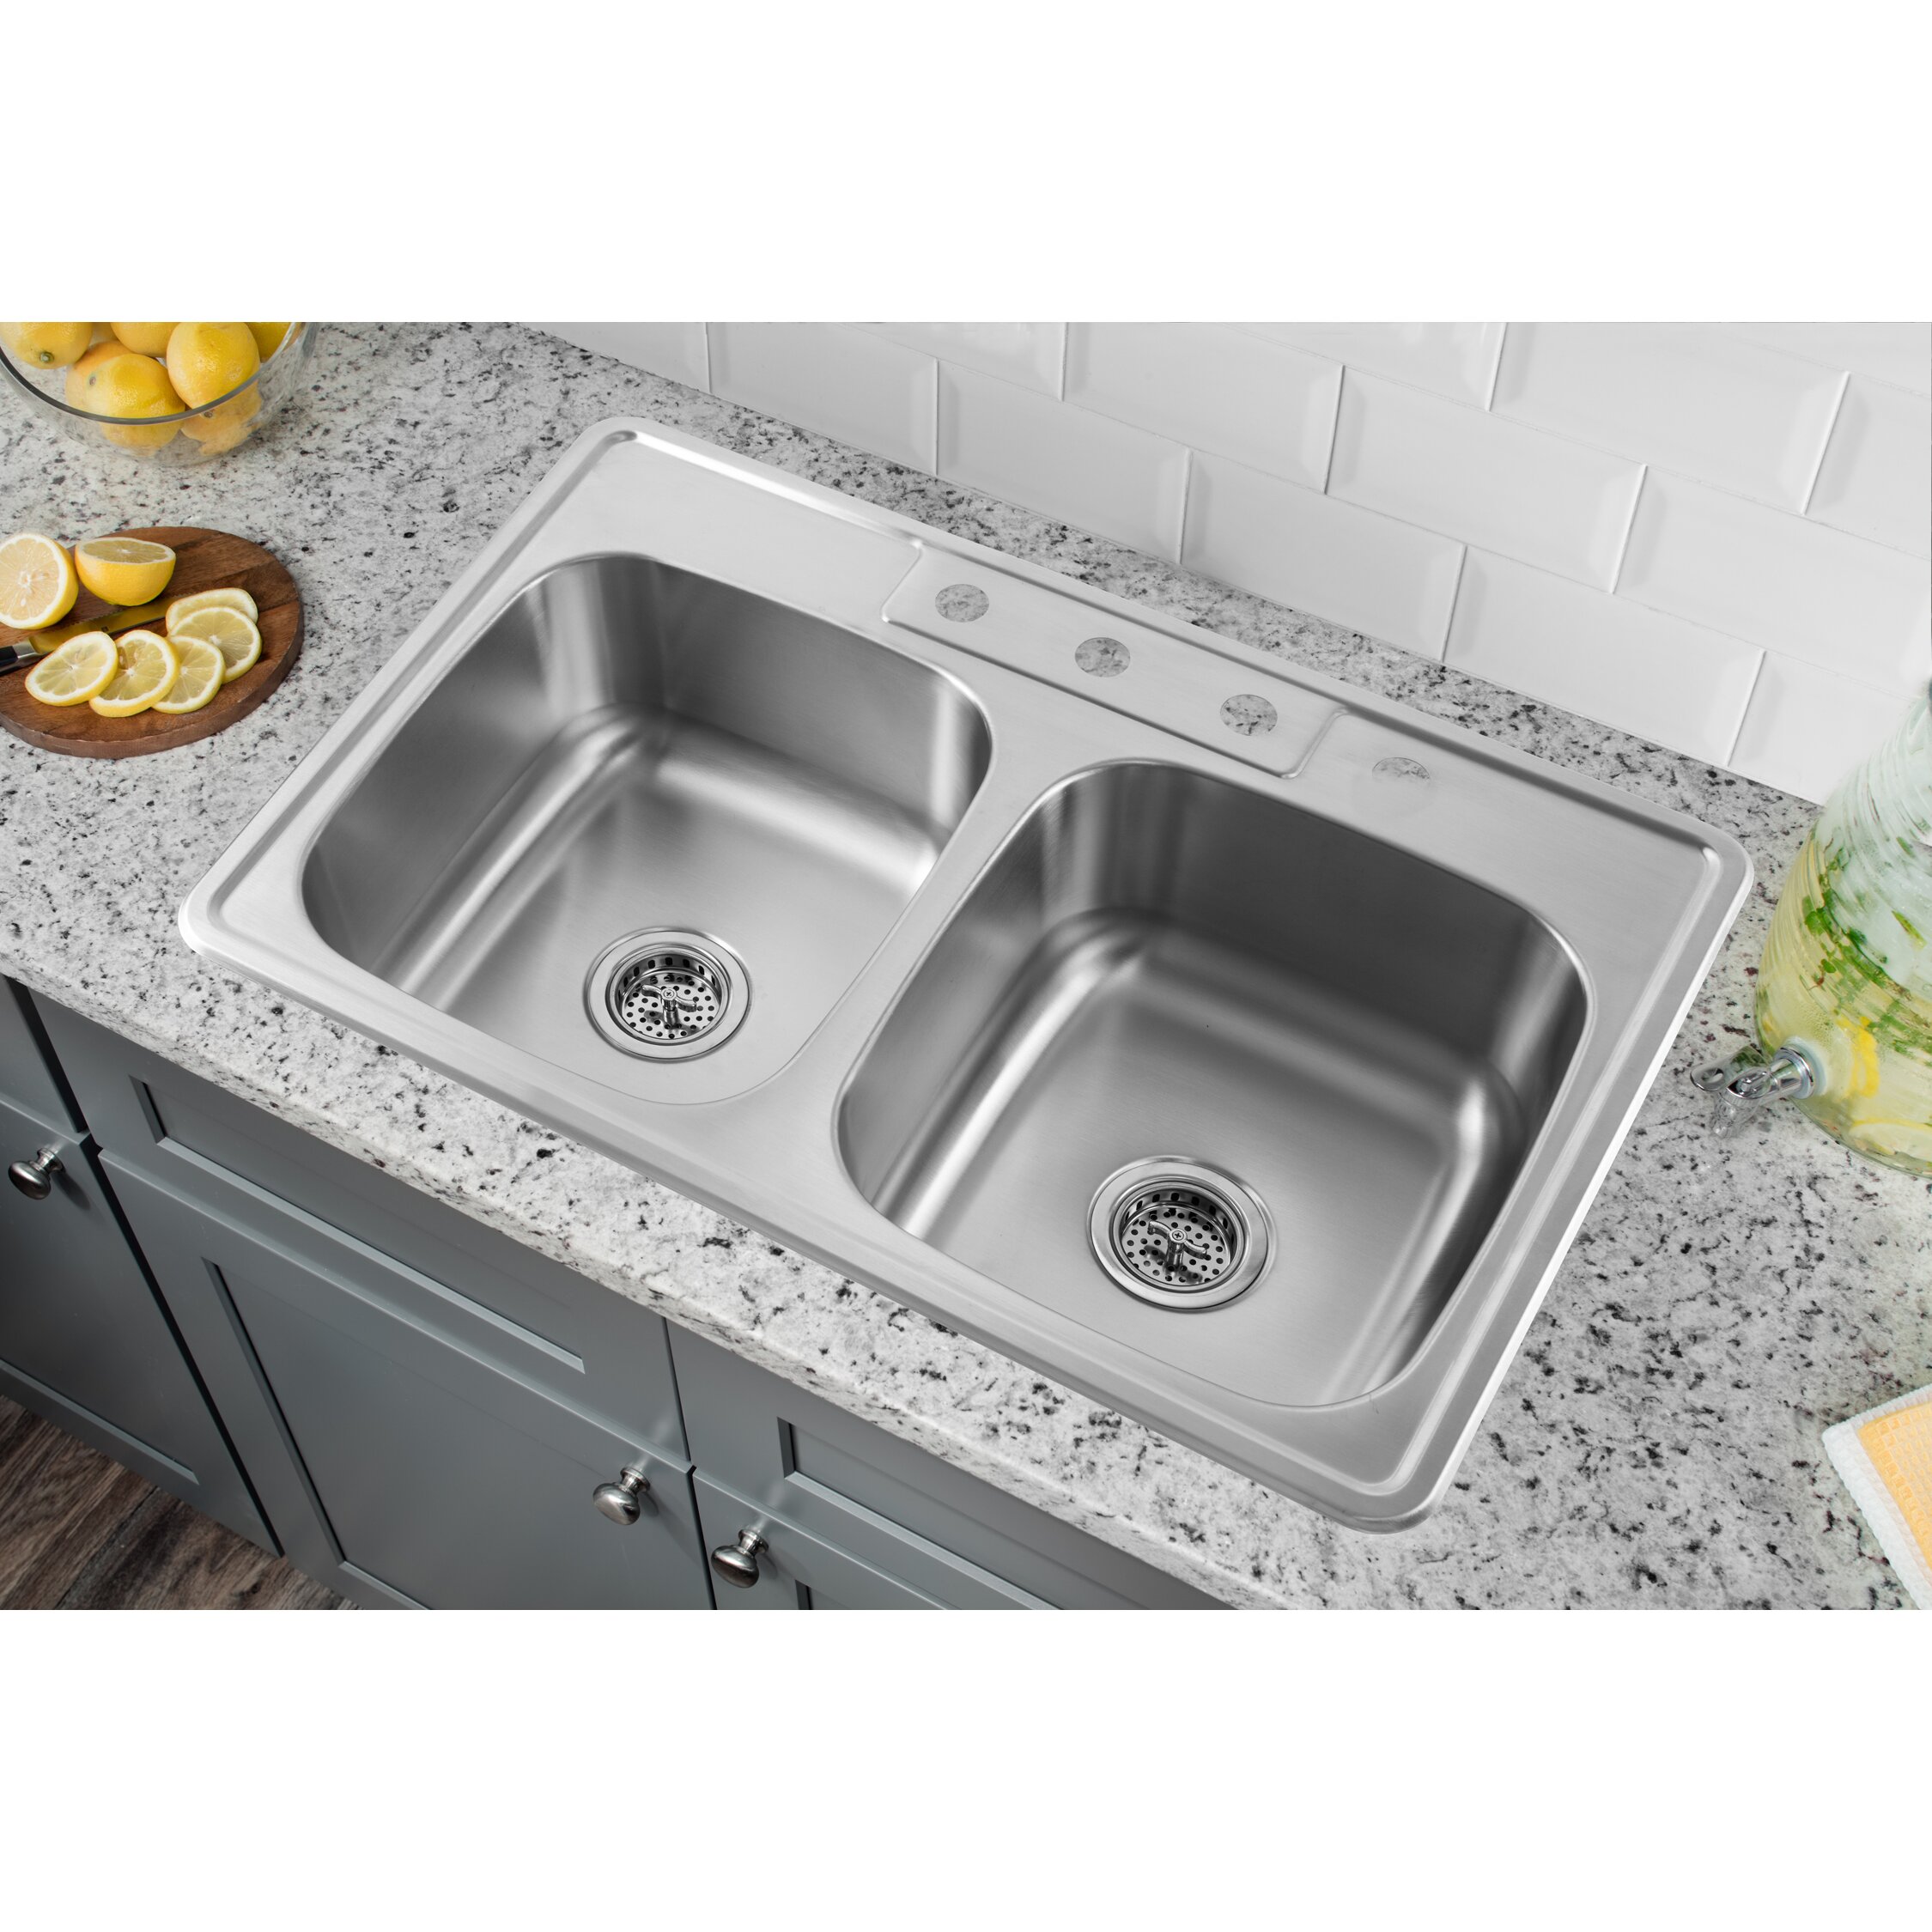 Soleil 33" x 22" Stainless Steel Drop In Double Bowl Kitchen Sink 33 X 22 Stainless Steel Kitchen Sink